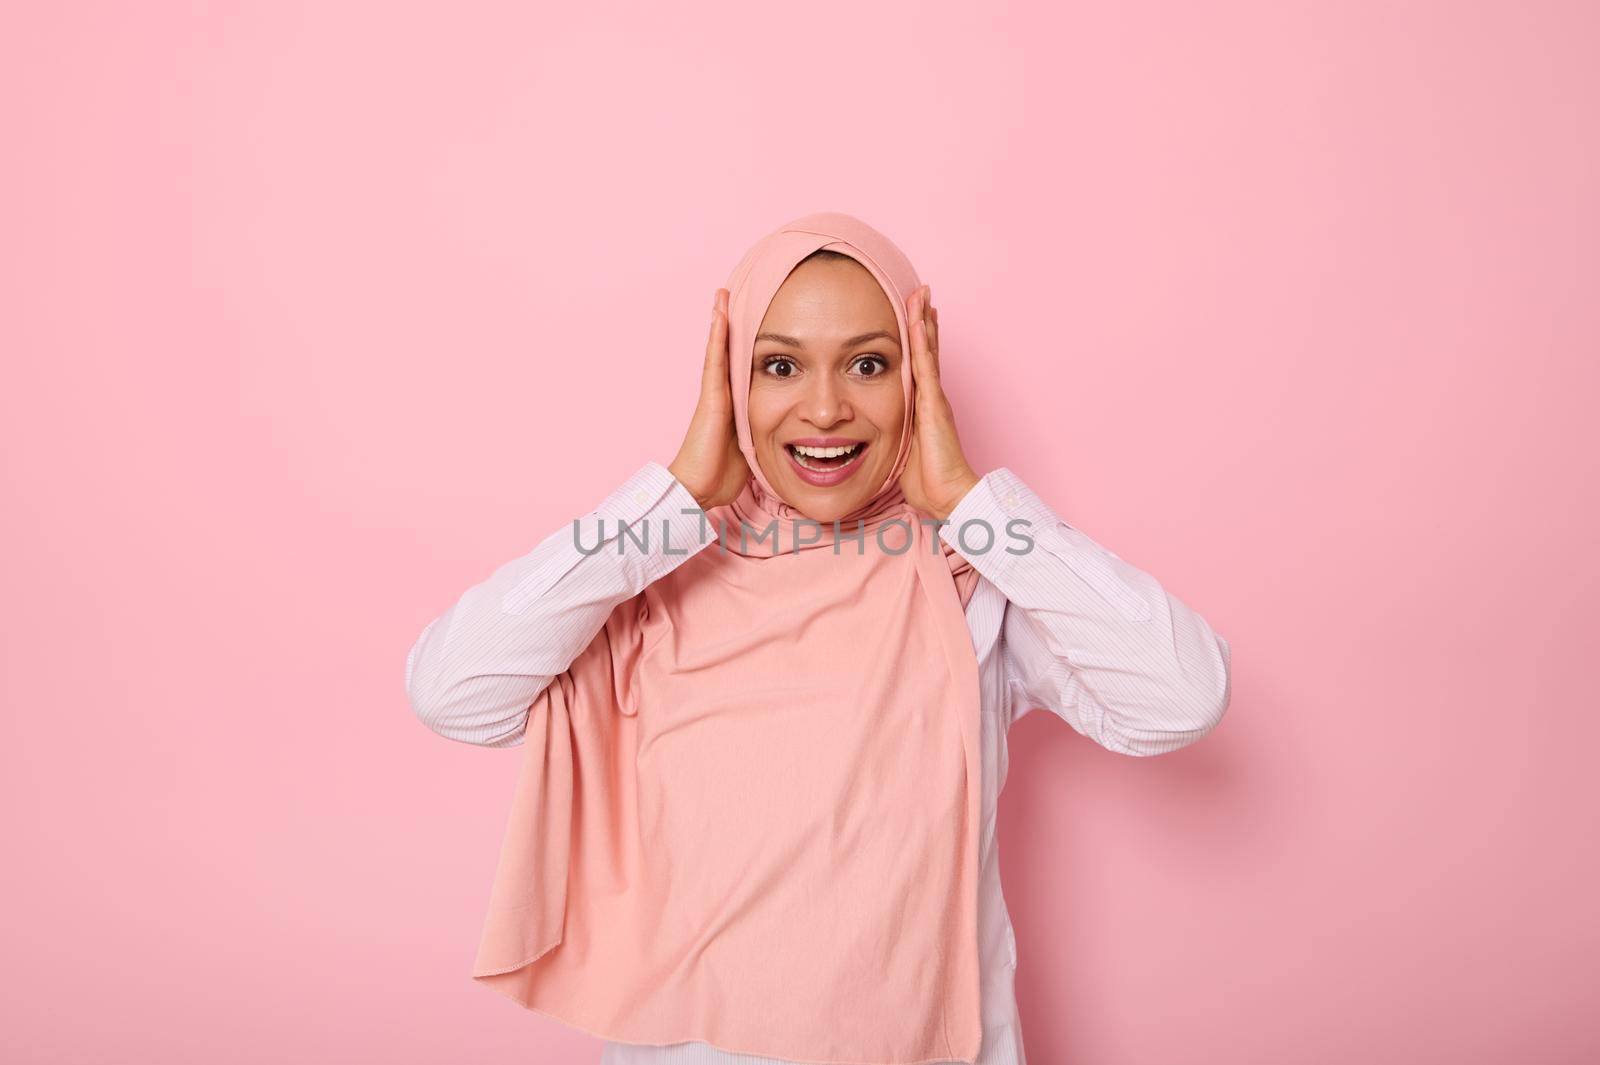 Main focus on facial expression of Muslim woman in pink hijab holding her head with hands, smiling with toothy smile looking at camera with surprised look, isolated on colored background, copy space.